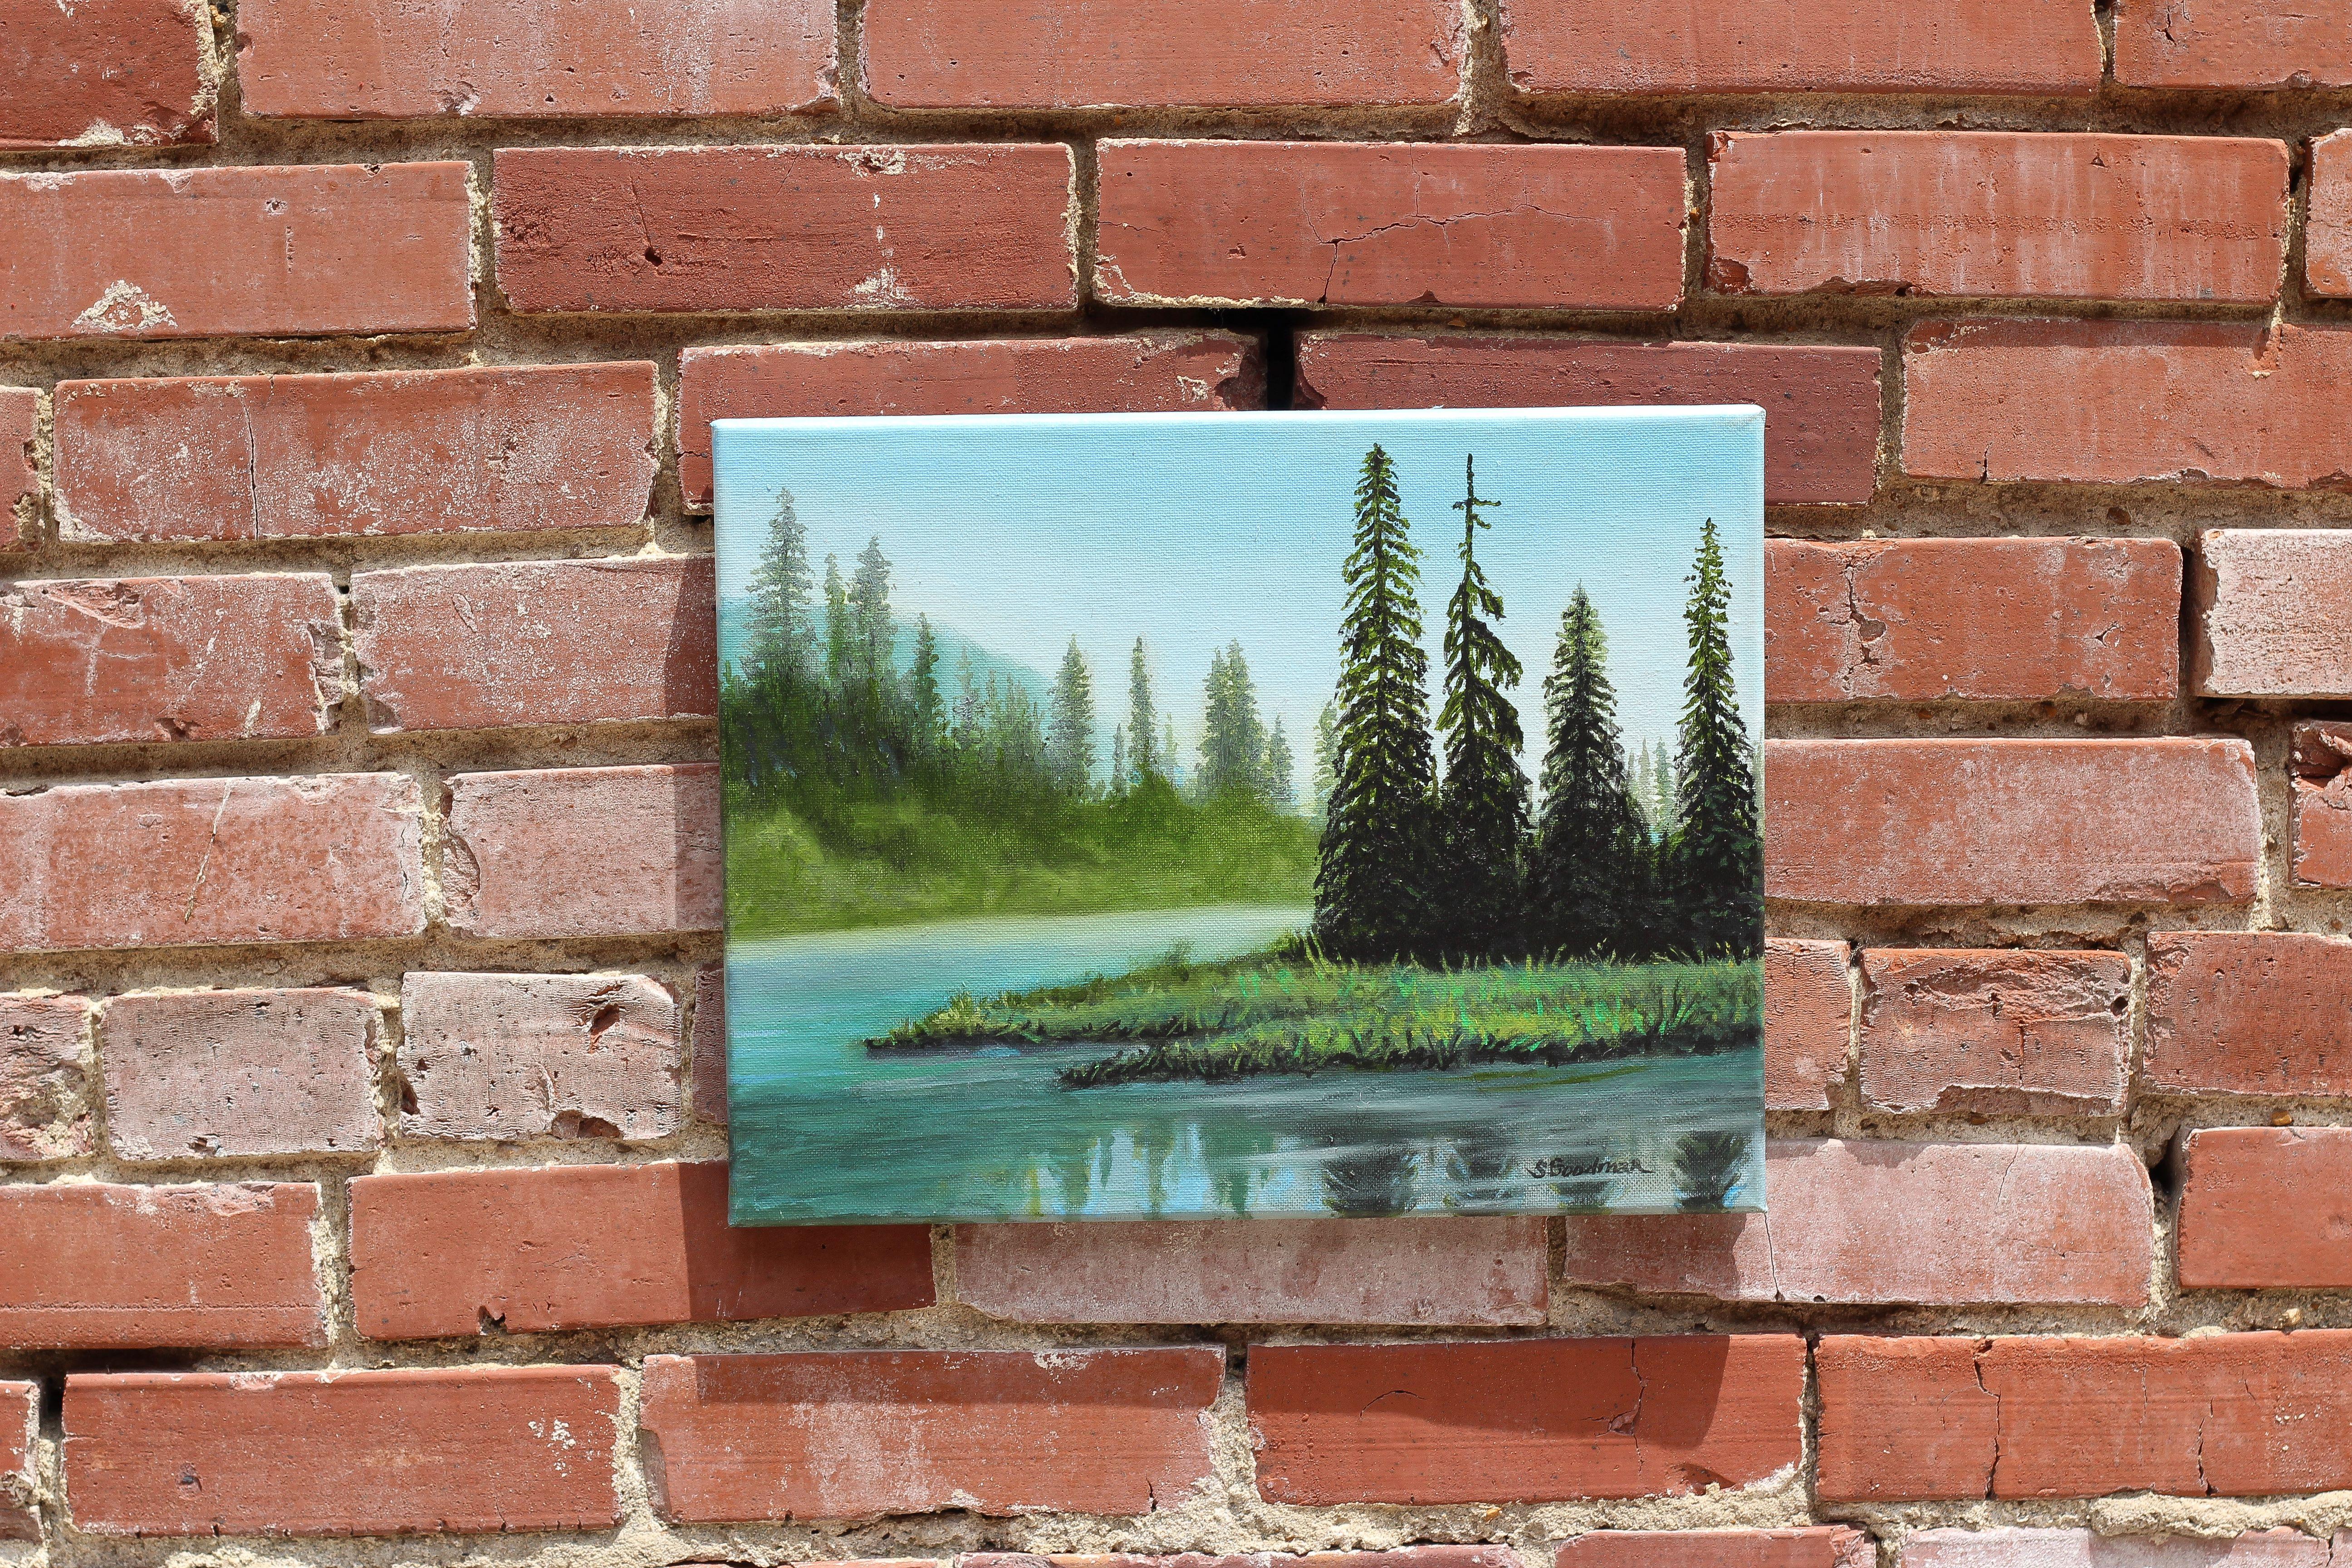 <p>Artist Comments<br>Artist Shela Goodman paints tall pine trees along a winding river. The stream runs through the banks with inviting serenity. Shela creates depth by enveloping the distant bank with a quiet fog. She renders the scene with